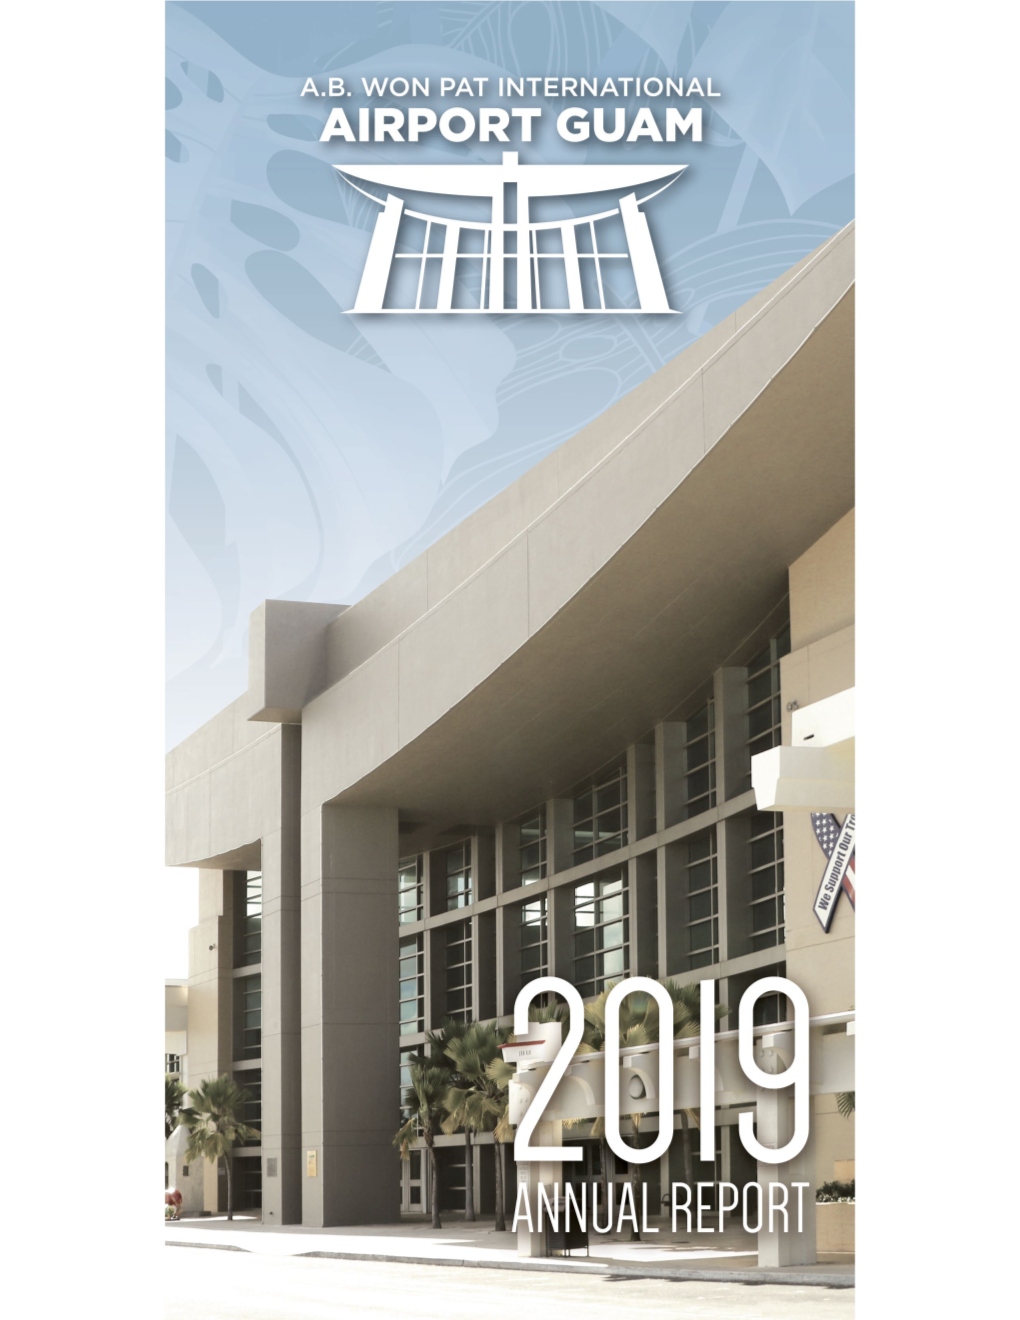 2019 Annual Report for the A.B